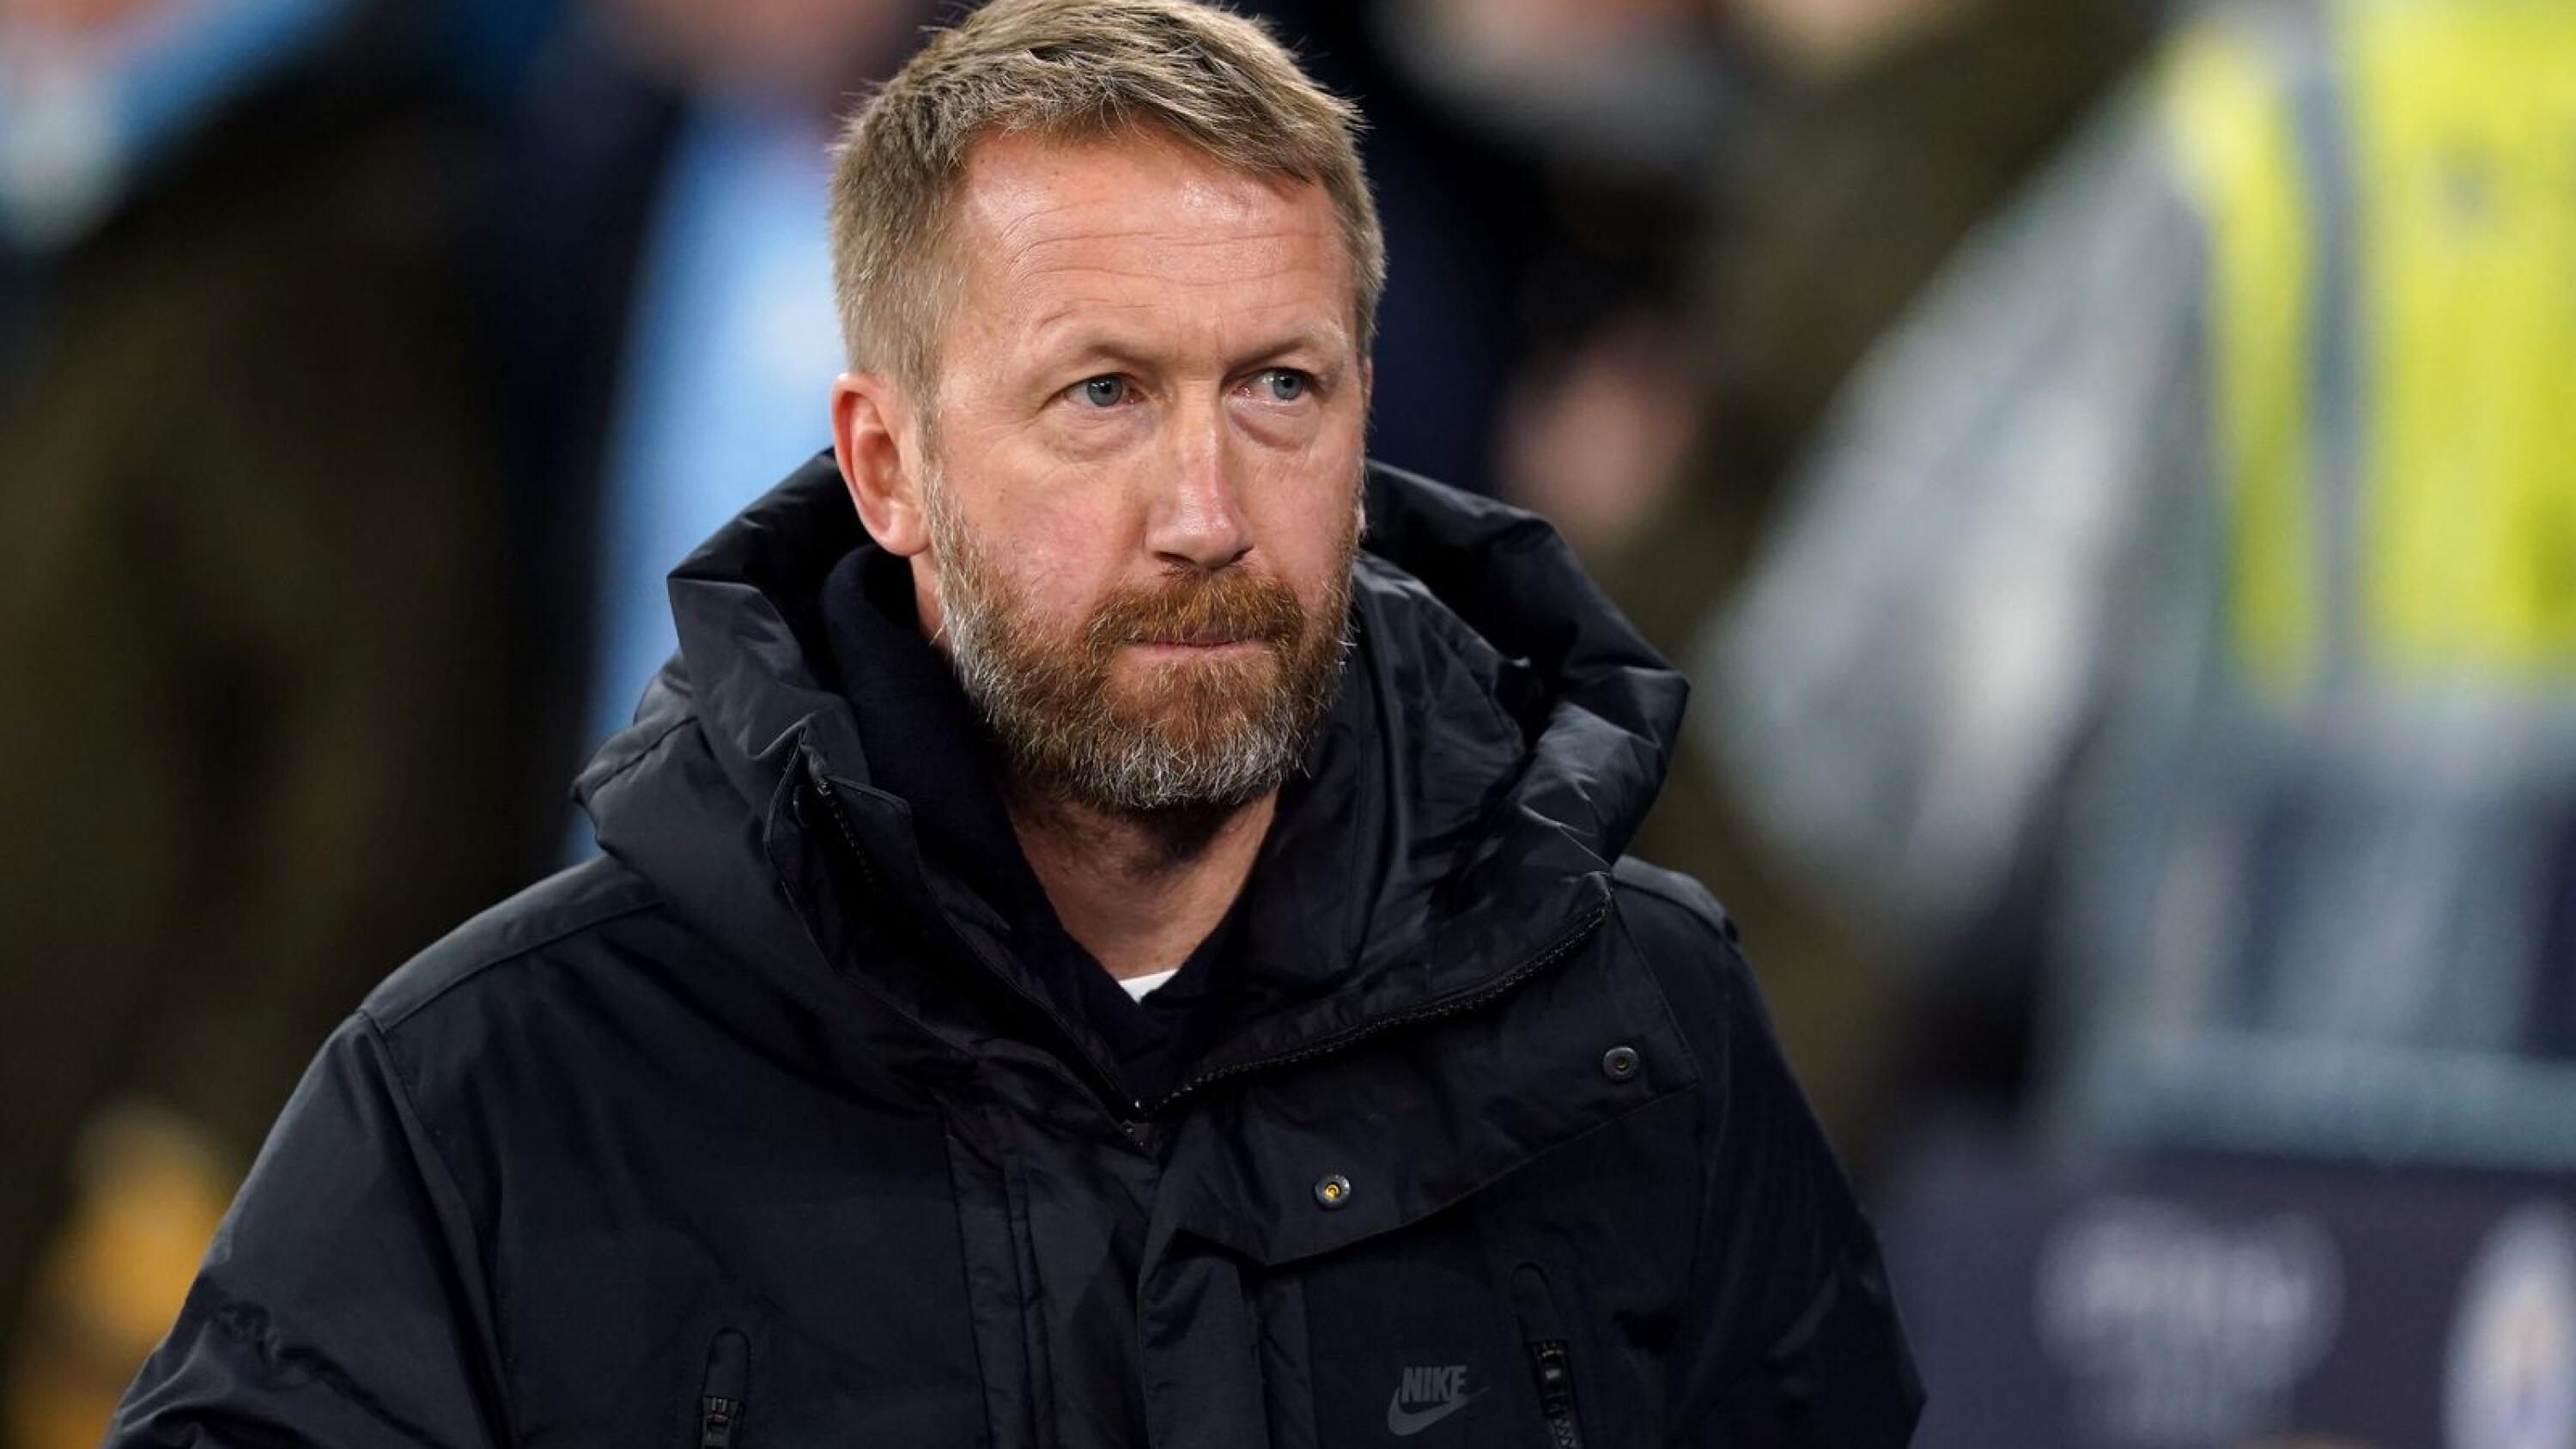 Chelsea have sacked manager Graham Potter, the London club said on Sunday after a string of poor results left the team 11th in the Premier League